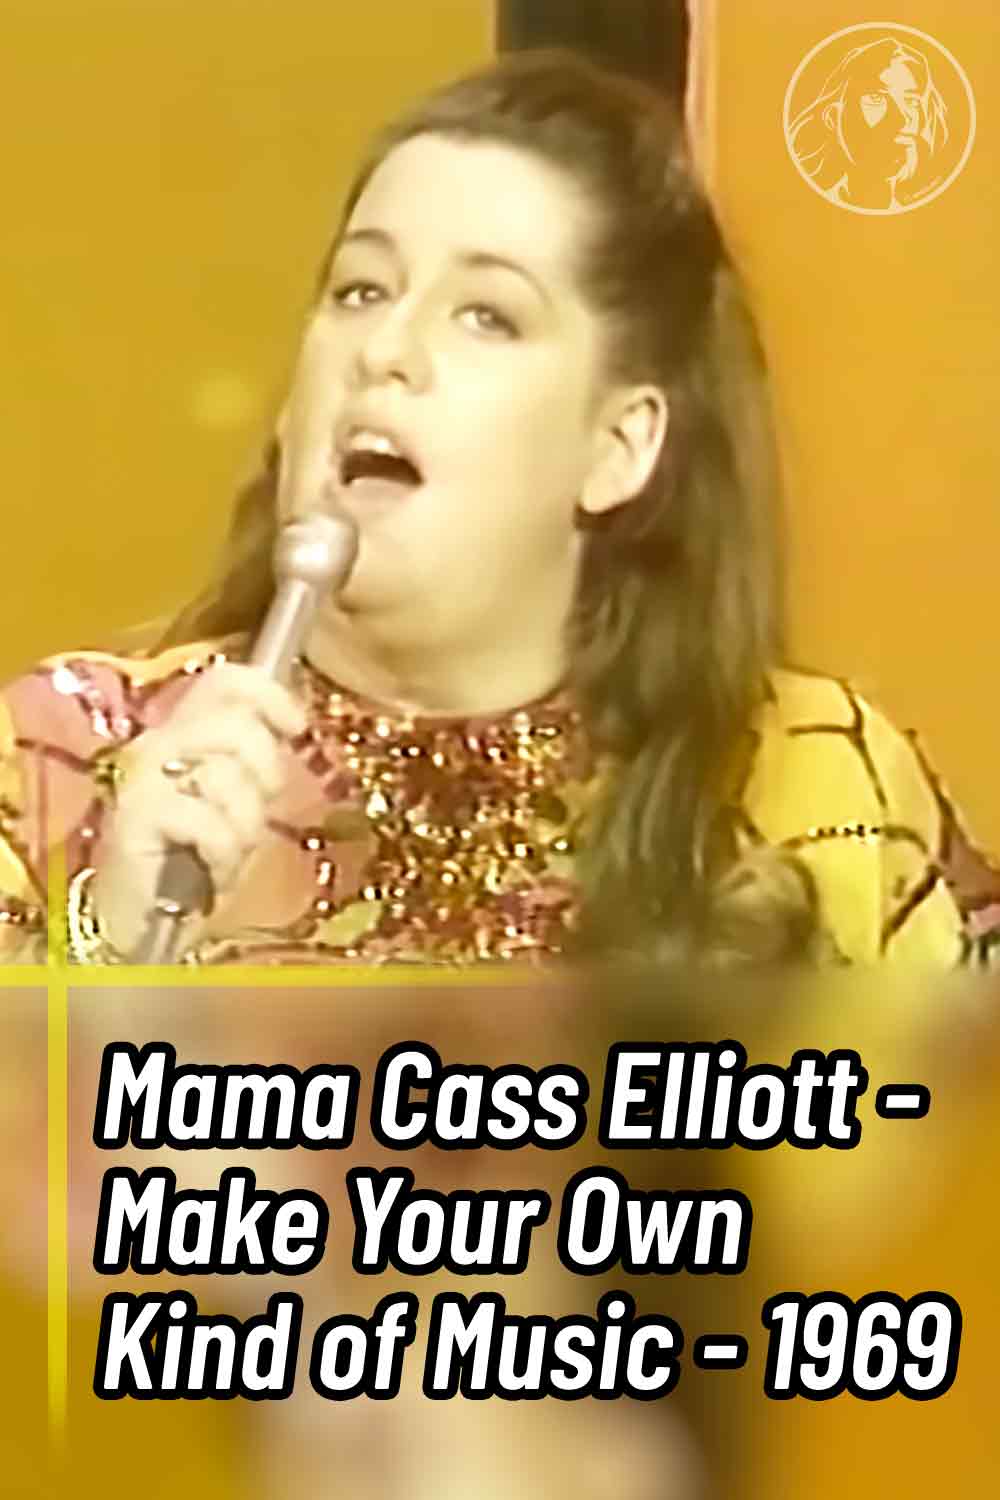 Mama Cass Elliott - Make Your Own Kind of Music - 1969